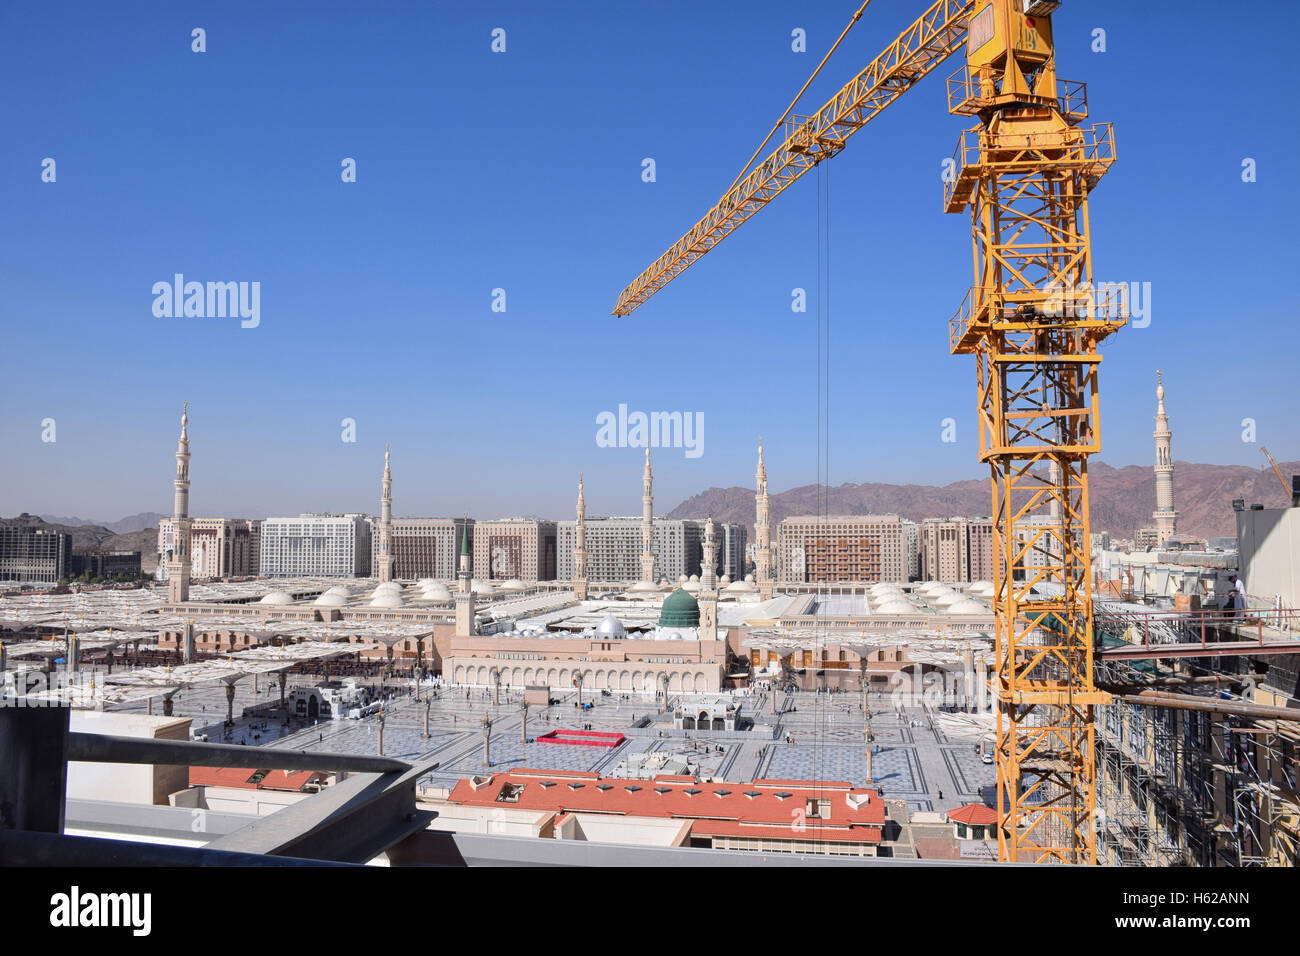 General view of the Prophet's Mosque (Al Masjid Al Nabawi) Stock Photo